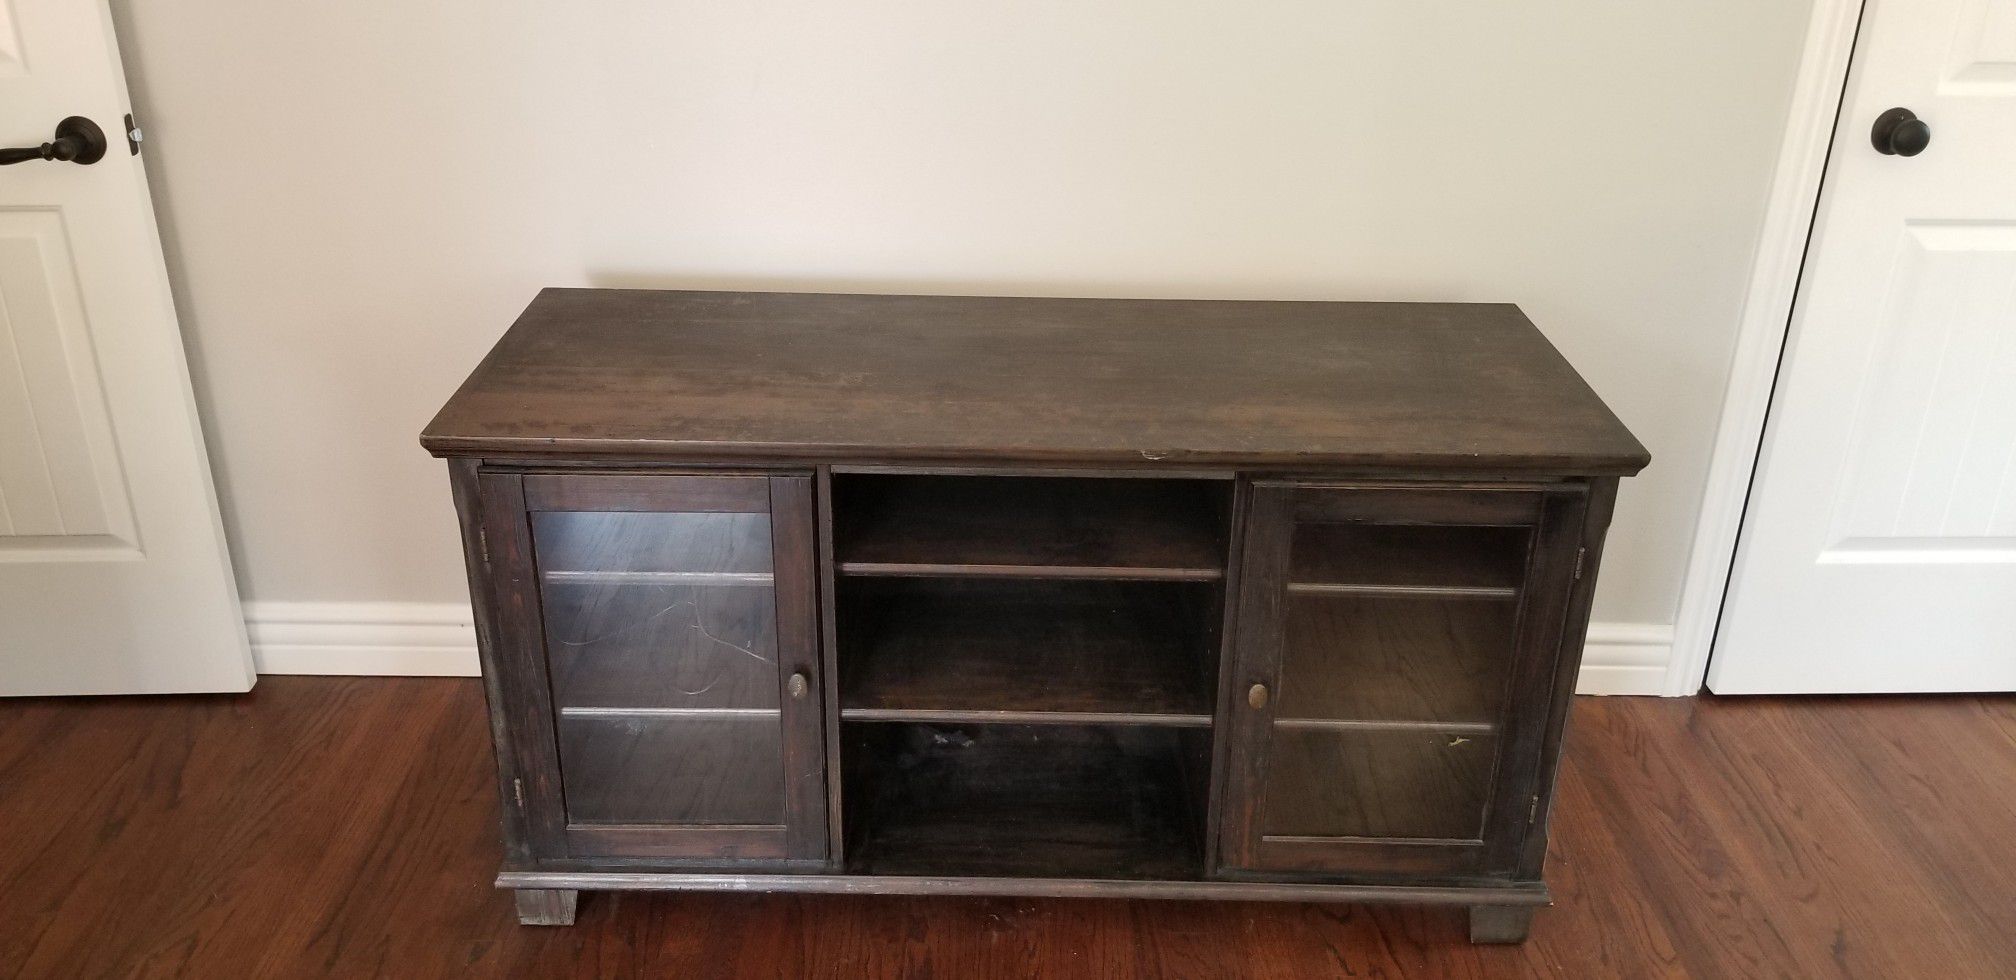 Rustic 5ft wood brown tv stand